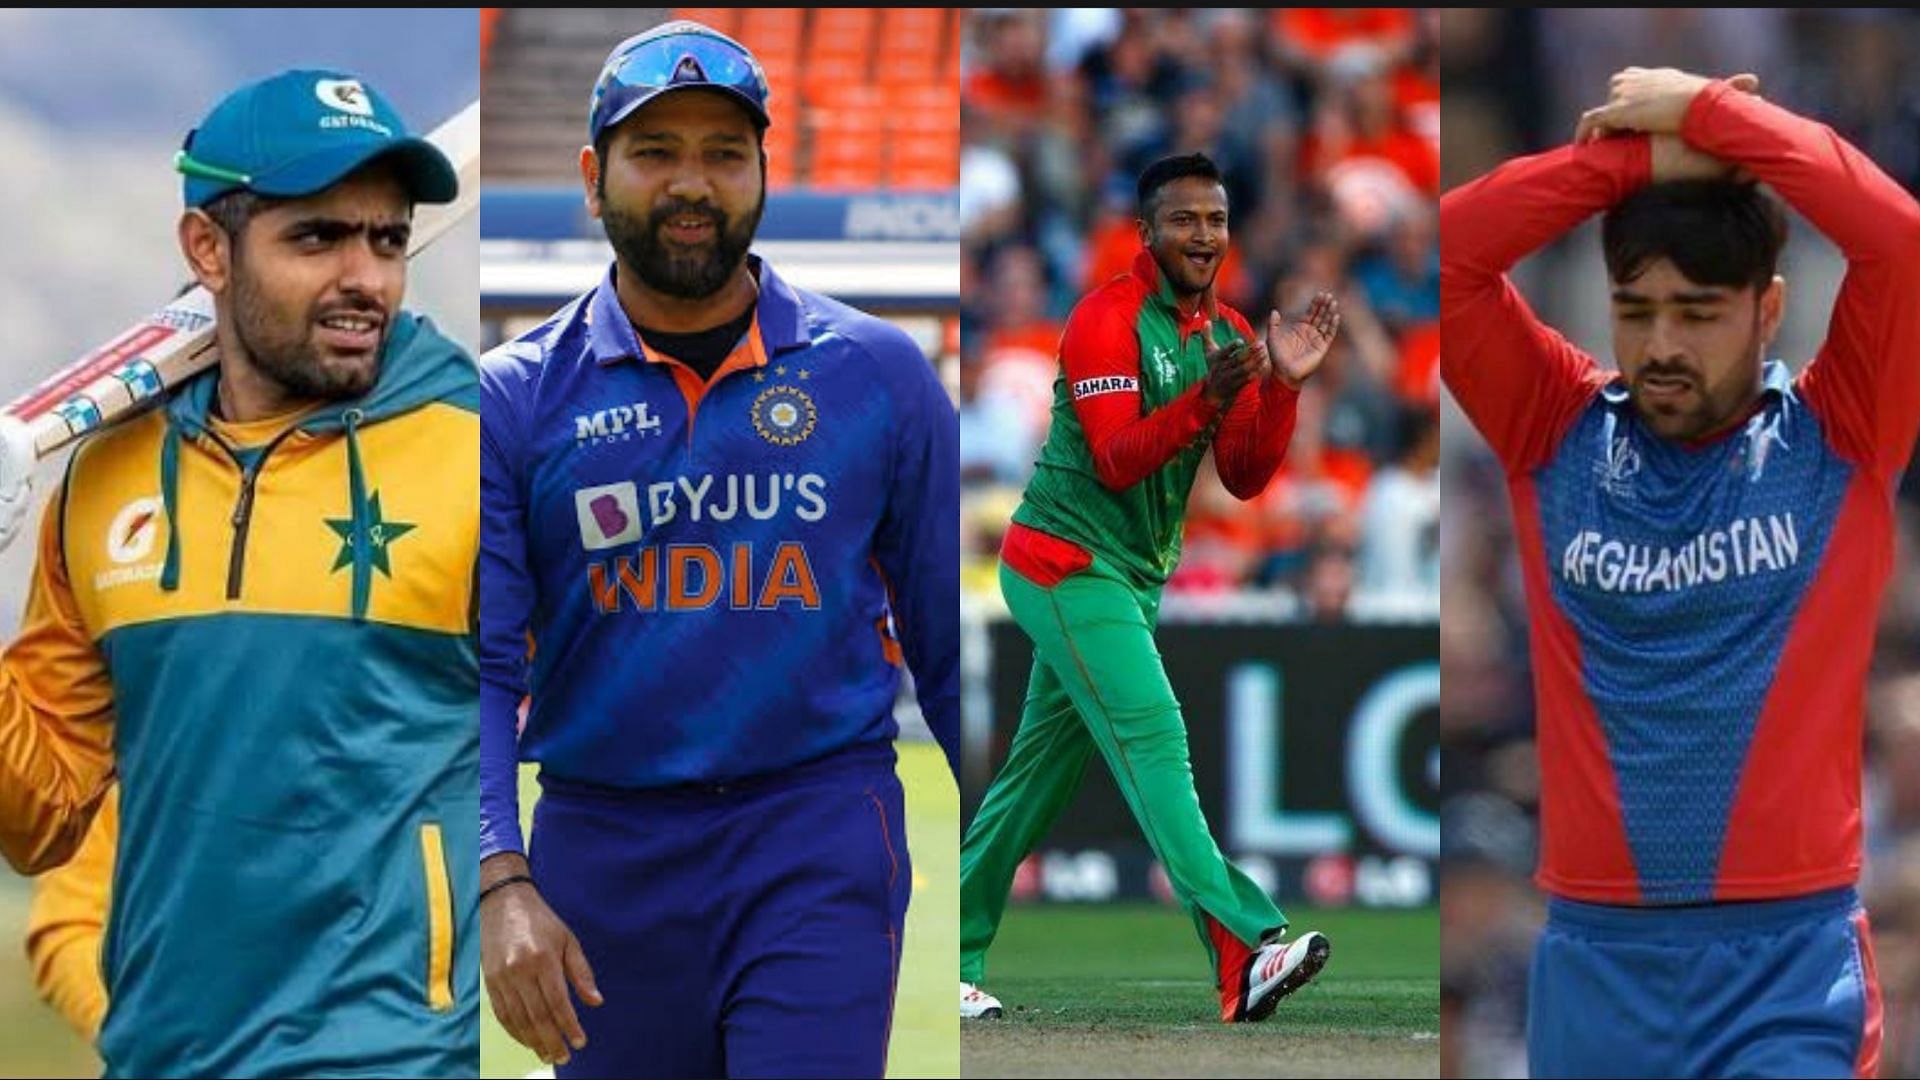 Asia Cup 2022 Live Streaming and Broadcast Details When and where to watch?